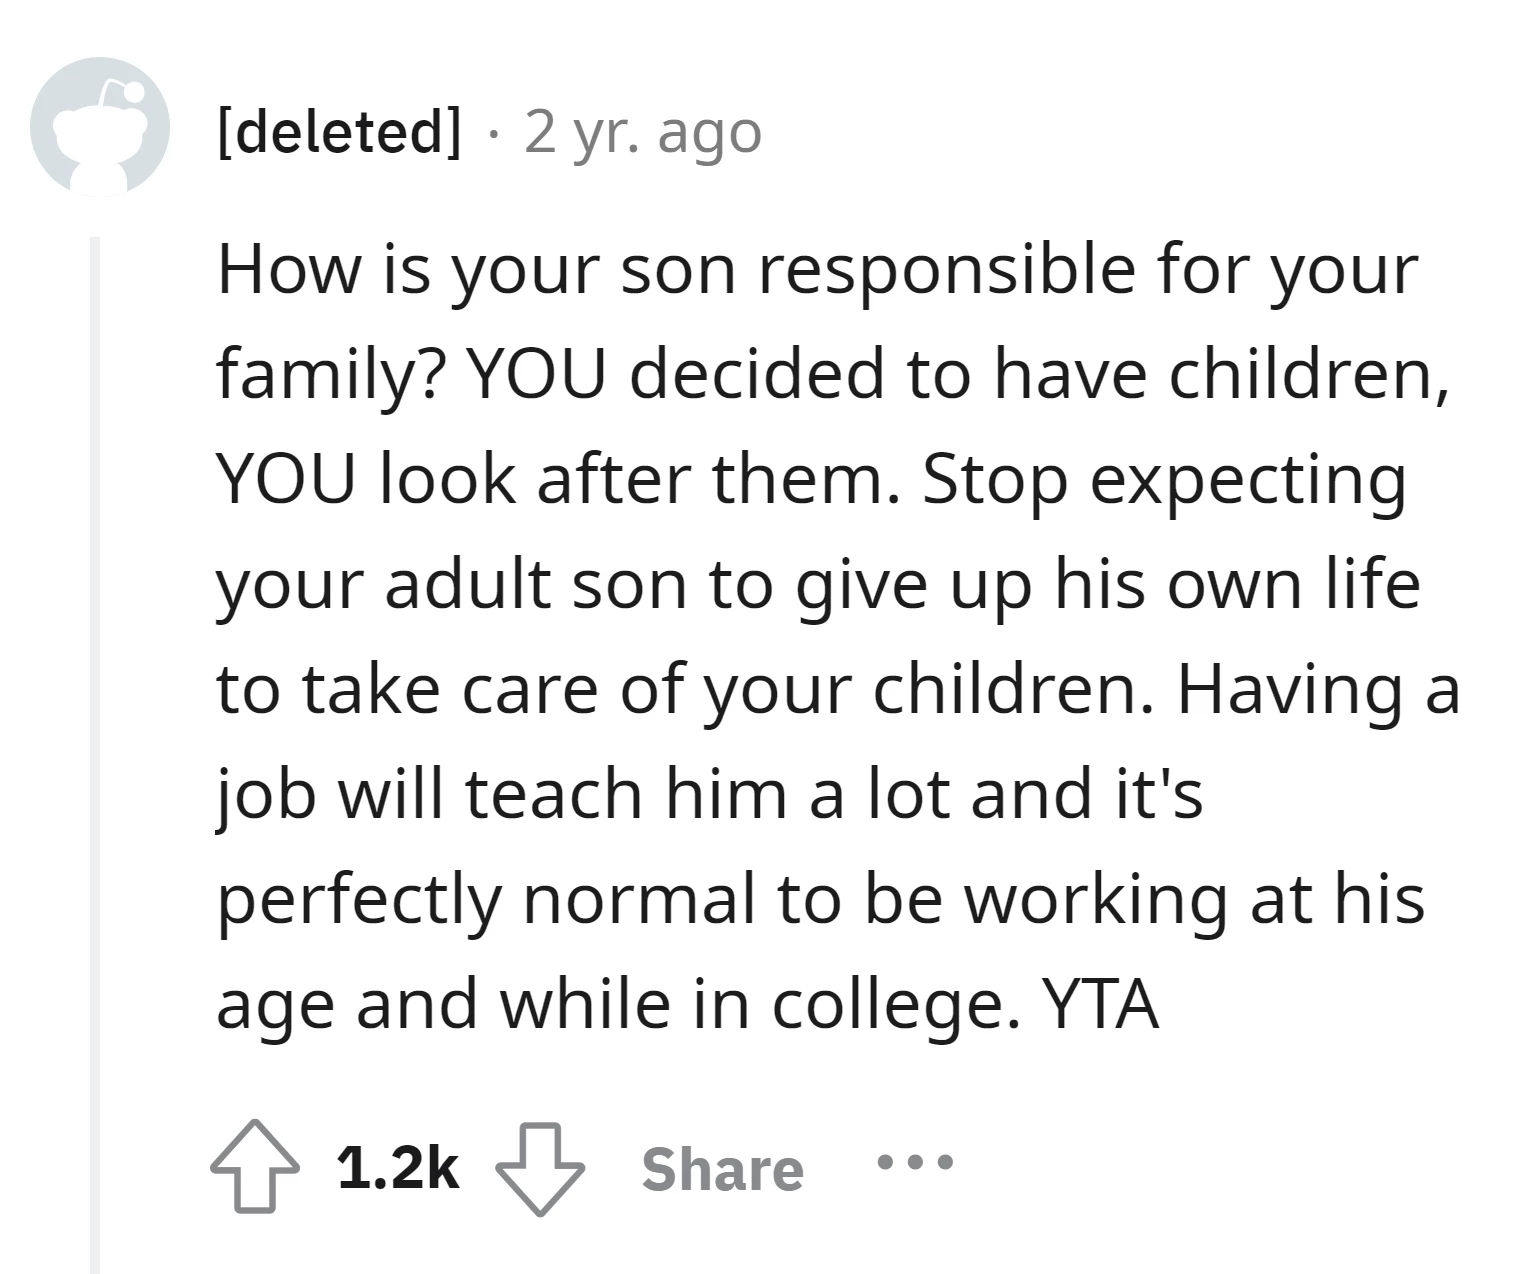 The OP chose to have children and should take care of them